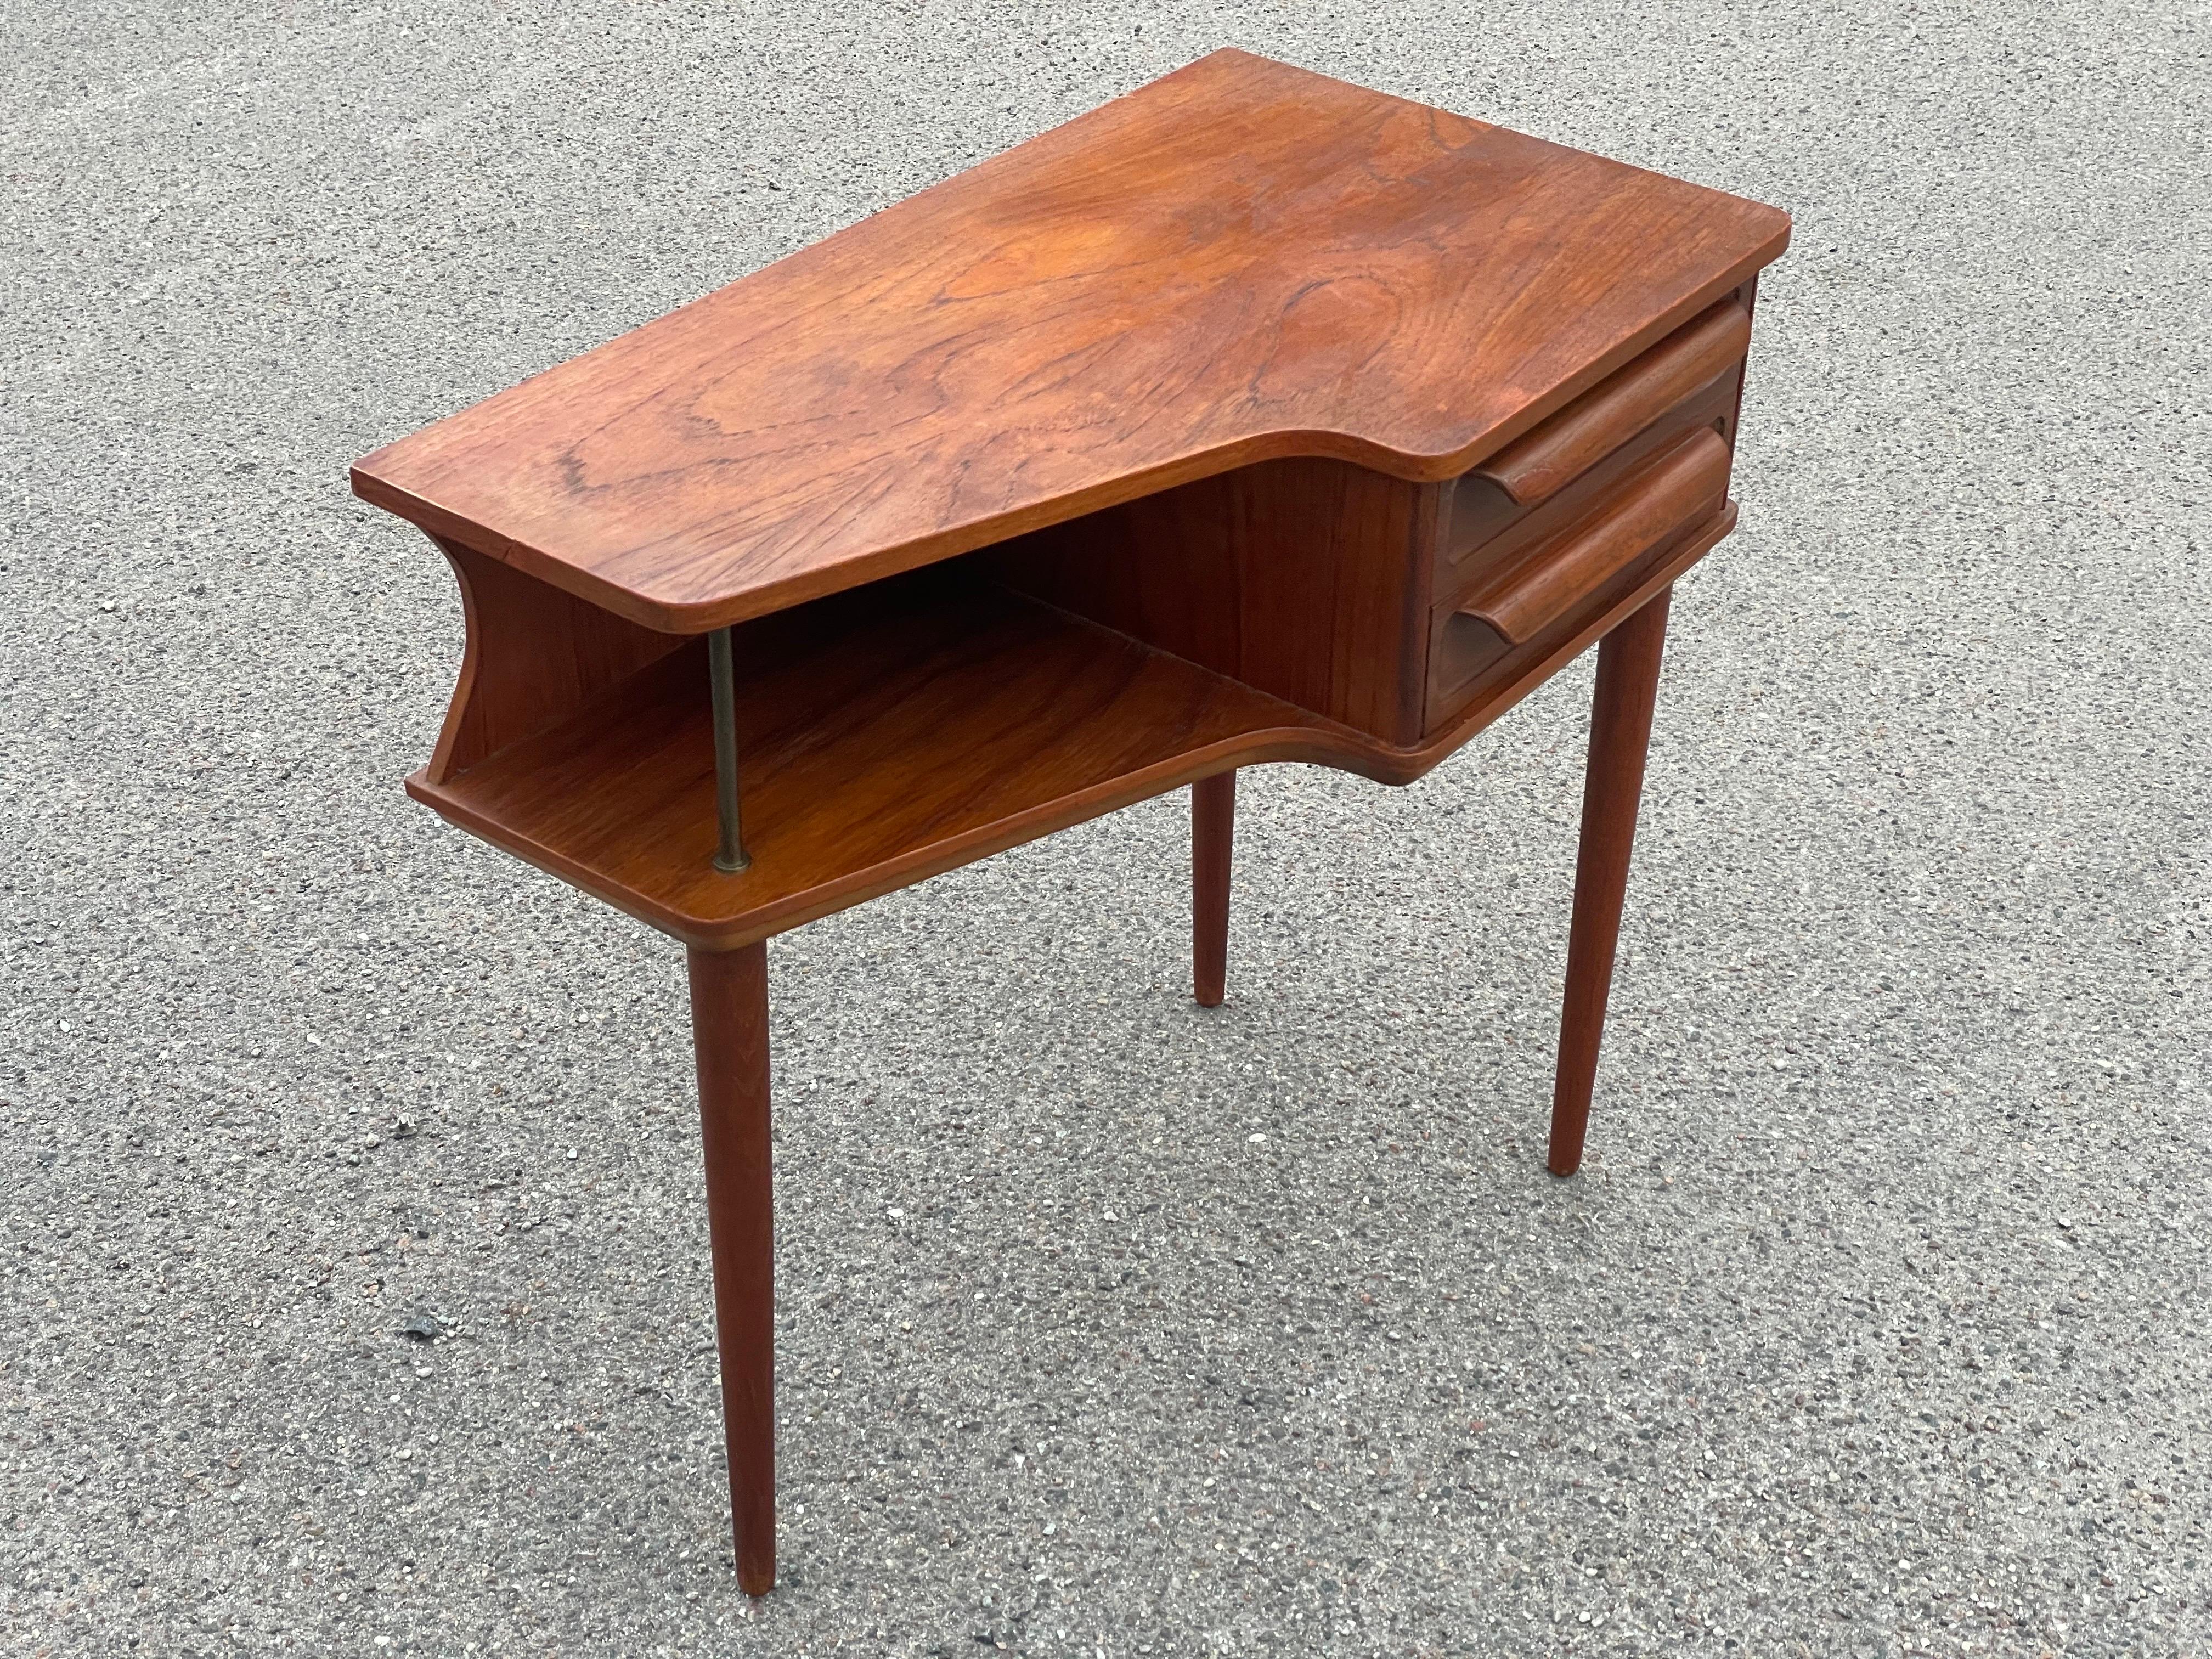 Exquisite find for enthusiasts of mid-century design: an Early Johannes Andersen Teak Side Table from 1960. This rare gem boasts an early CFC Silkeborg brandmark underneath, a testament to its authentic vintage origins. With its distinctive three